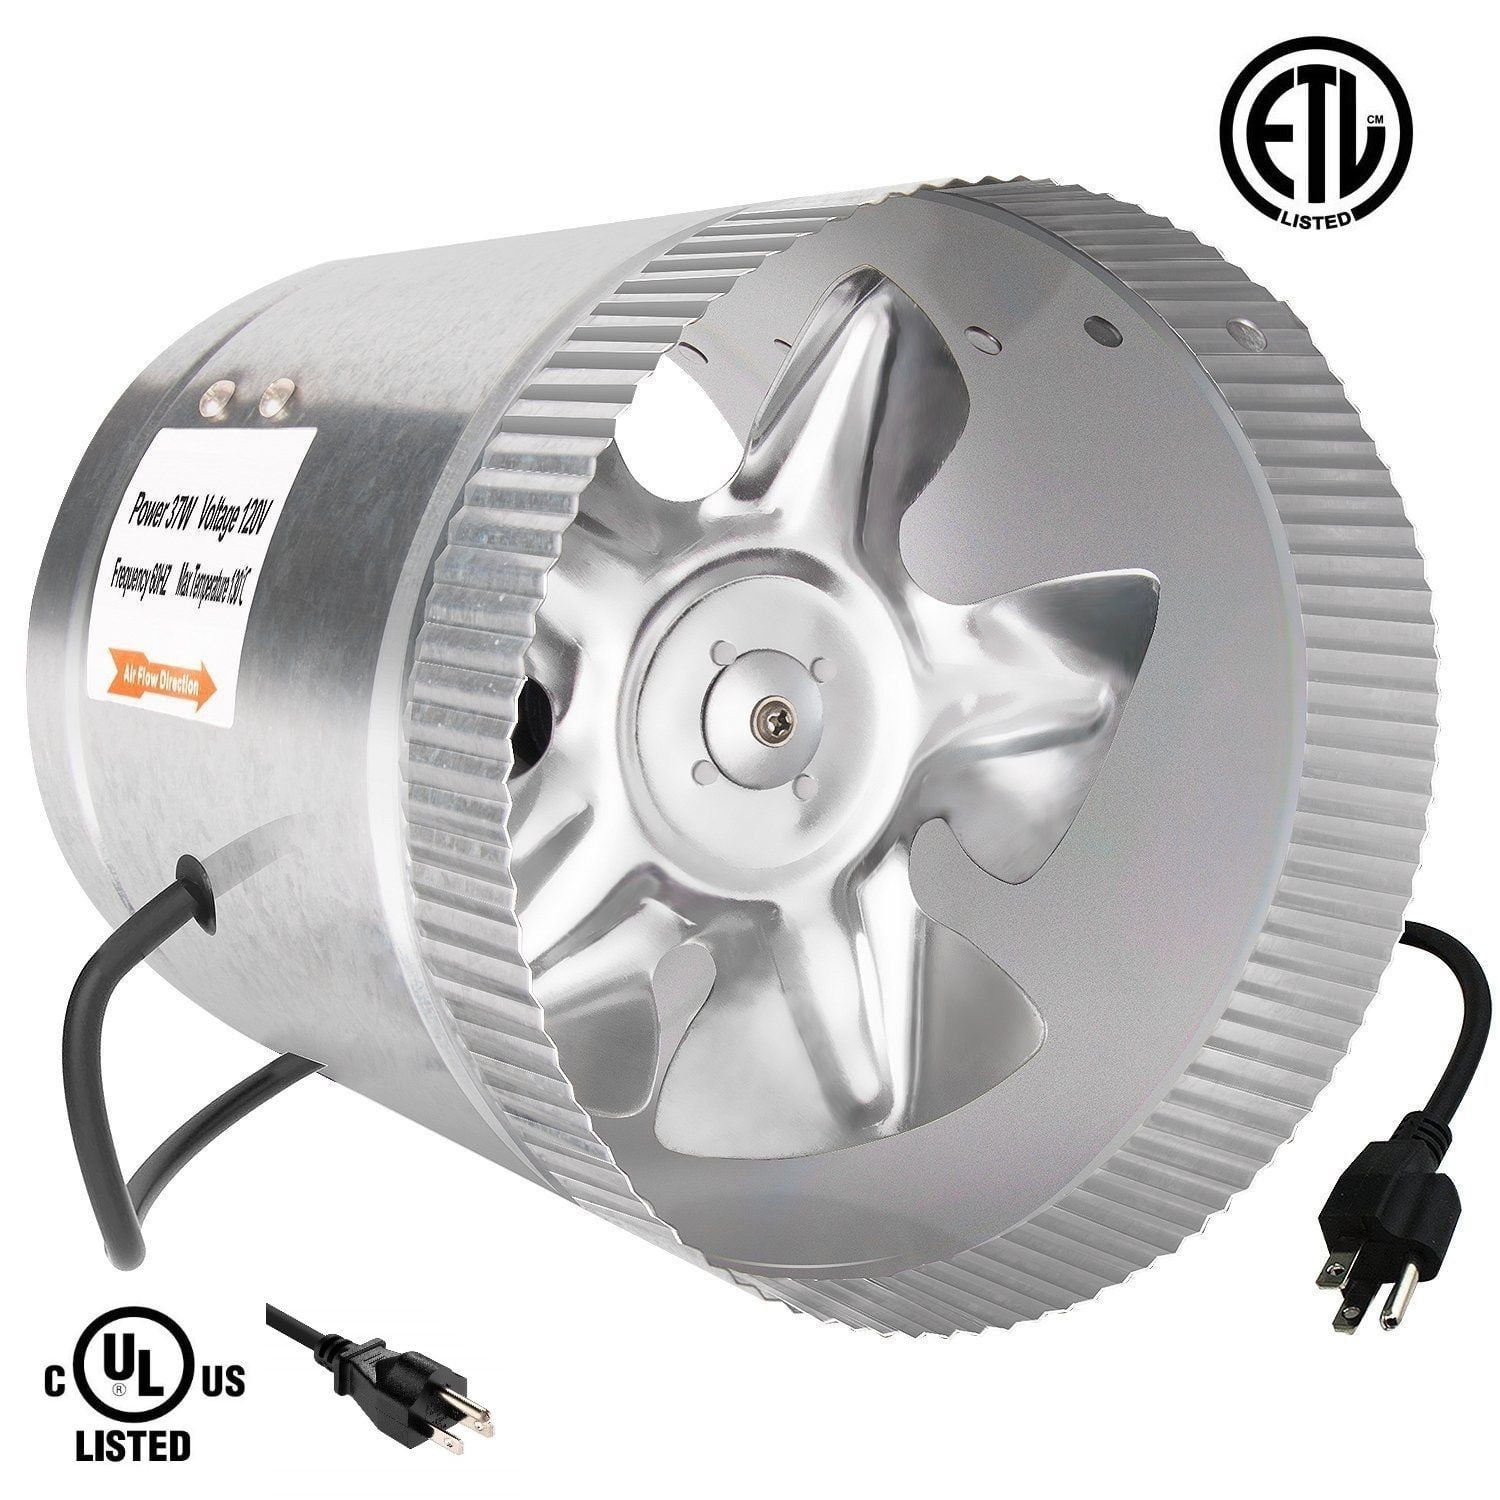 iPower 6 Inch 240 CFM Booster Inline Duct Vent Blower Exhaust & Intake HVAC Fans 